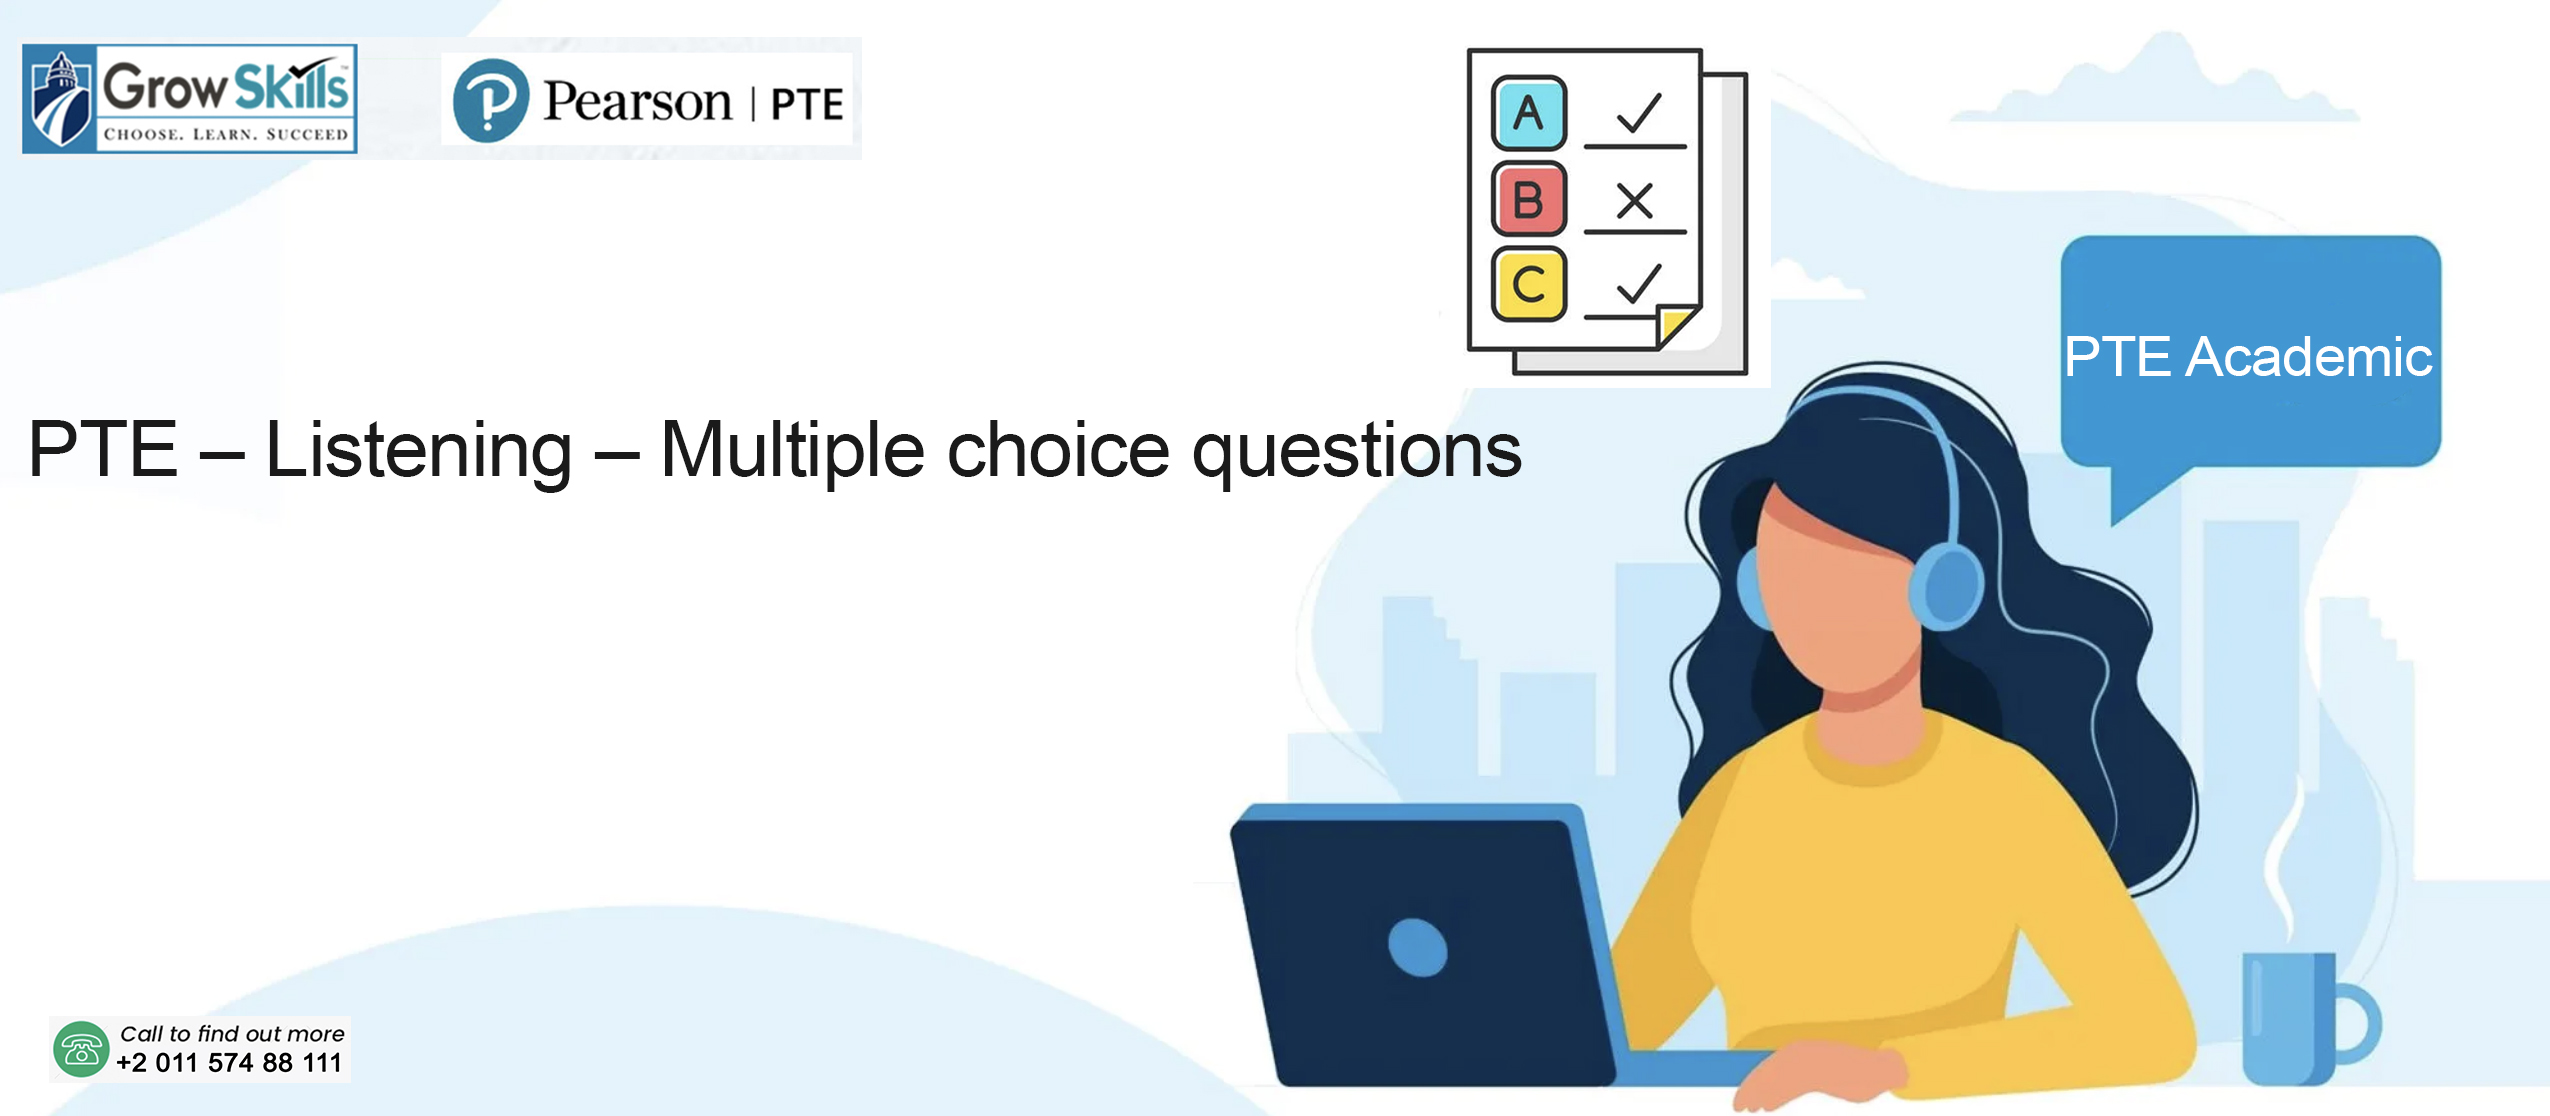 PTE – Listening – Multiple choice questions